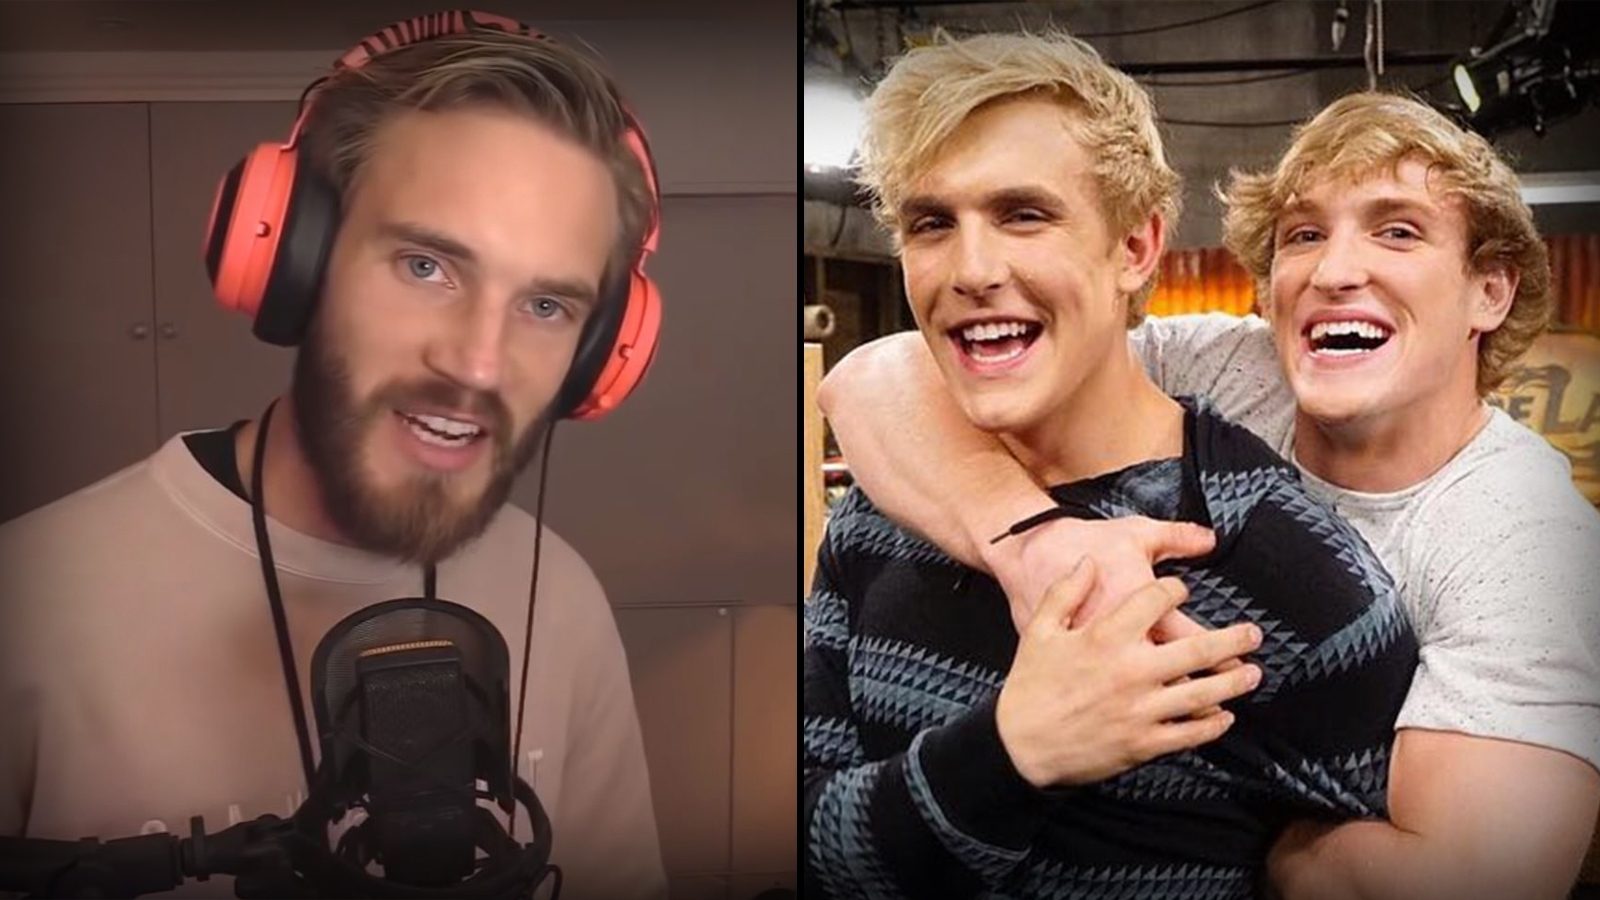 Who is the richest among Logan Paul, Mr. Beast, and PewDiePie? - Quora